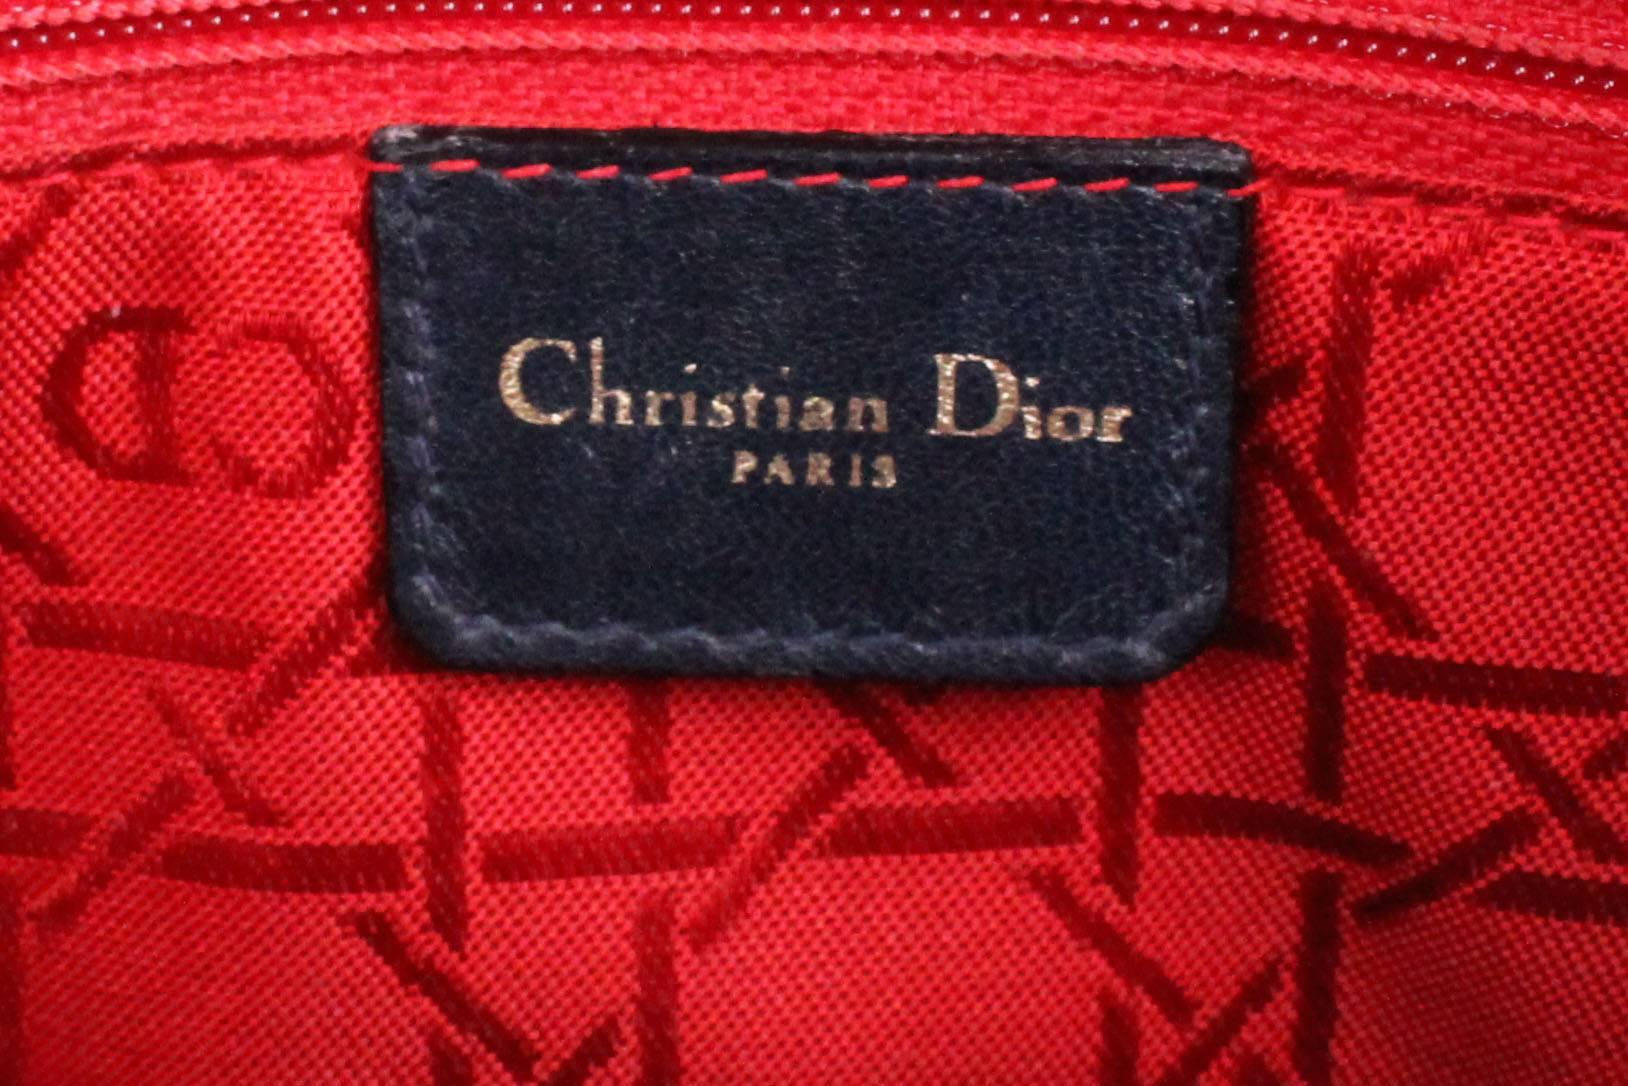 Christian Dior D bag in Navy leather. 5